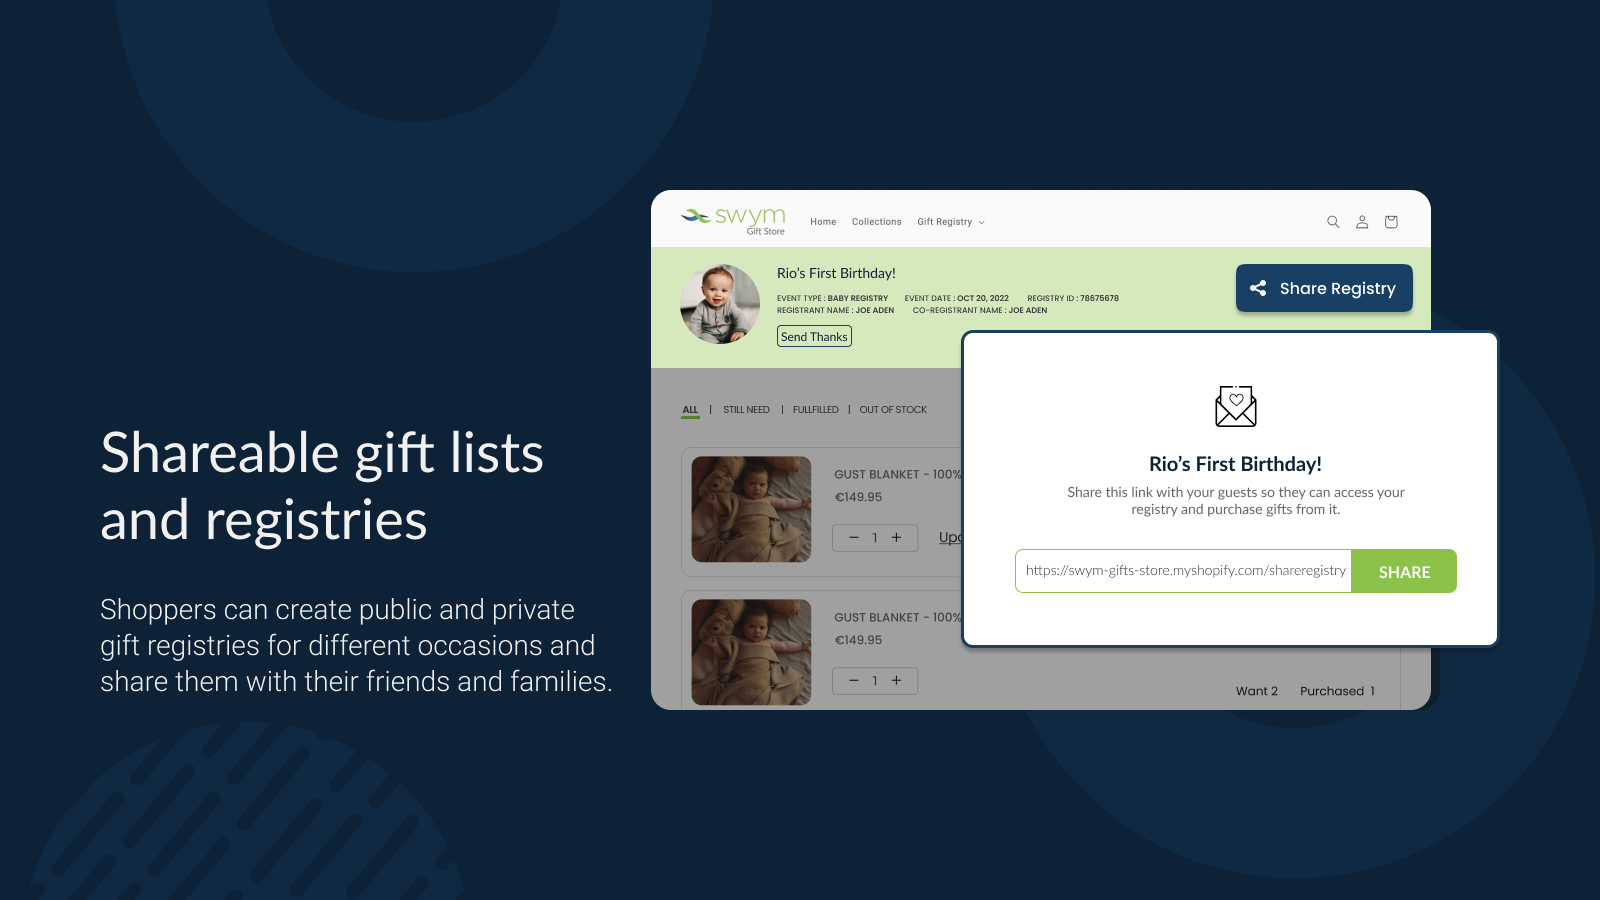 Easy to share gift lists and registries